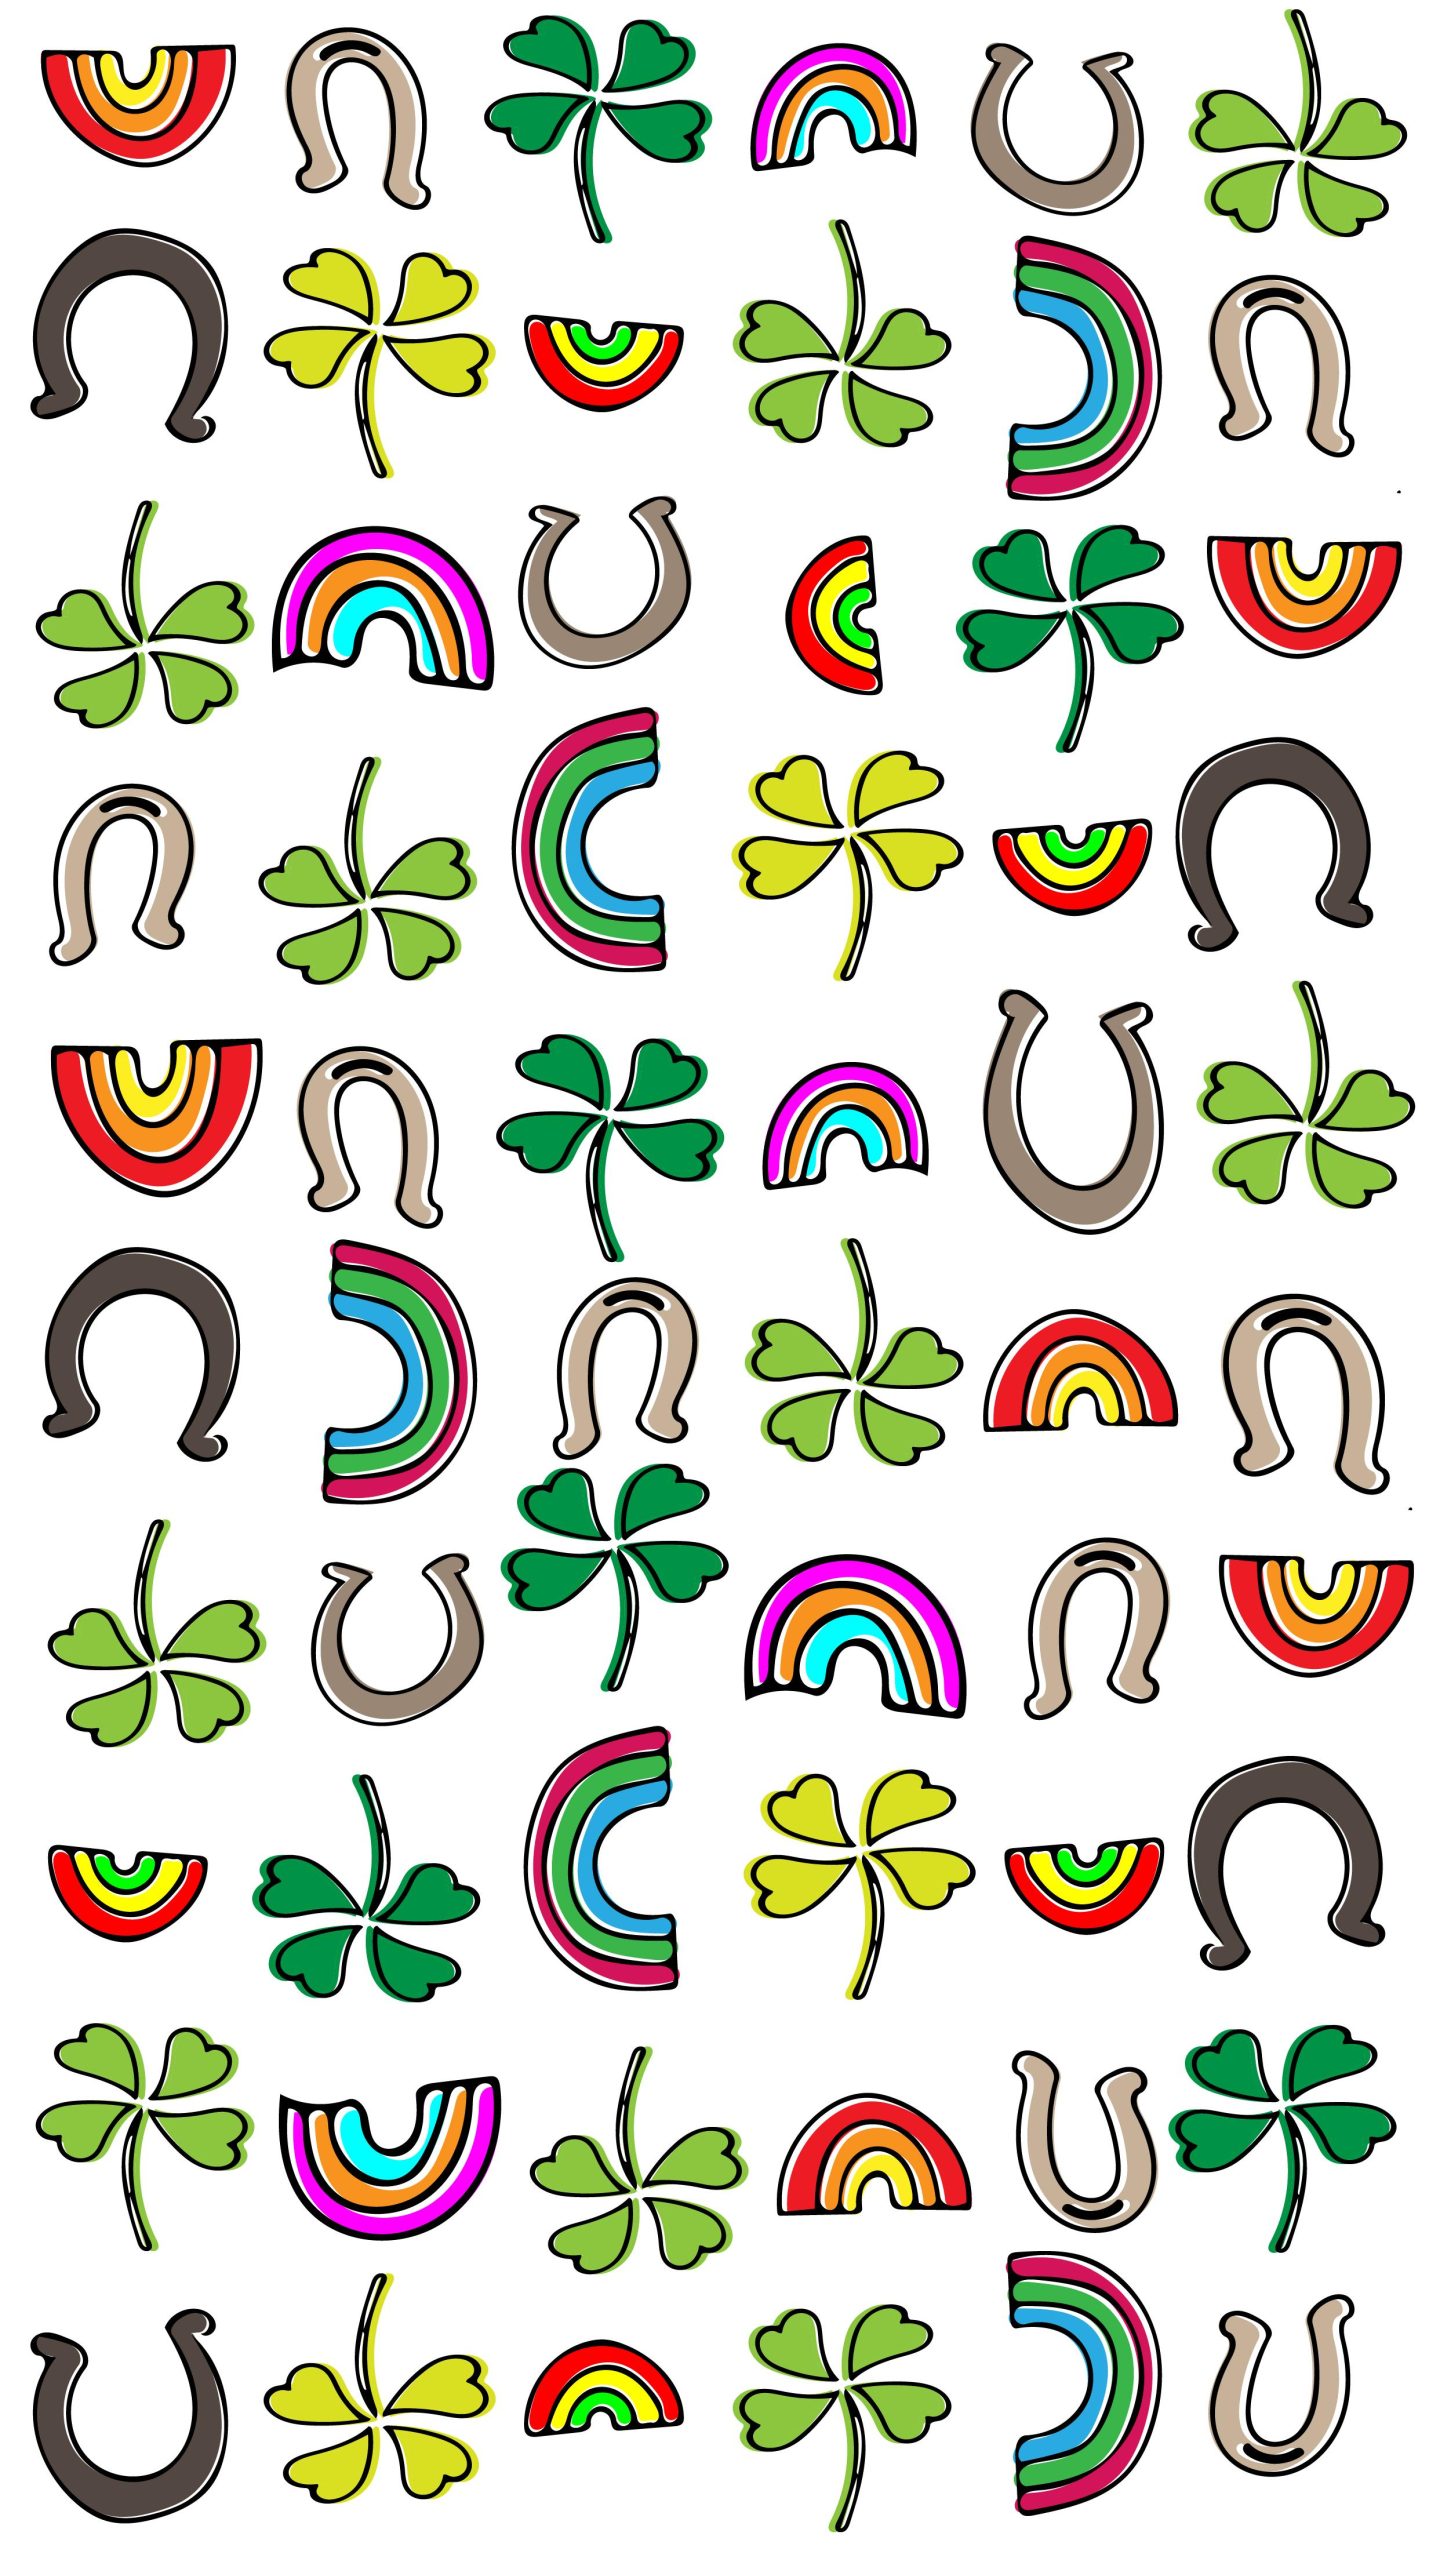 St Patrick’s Day iPhone 1080p Wallpaper